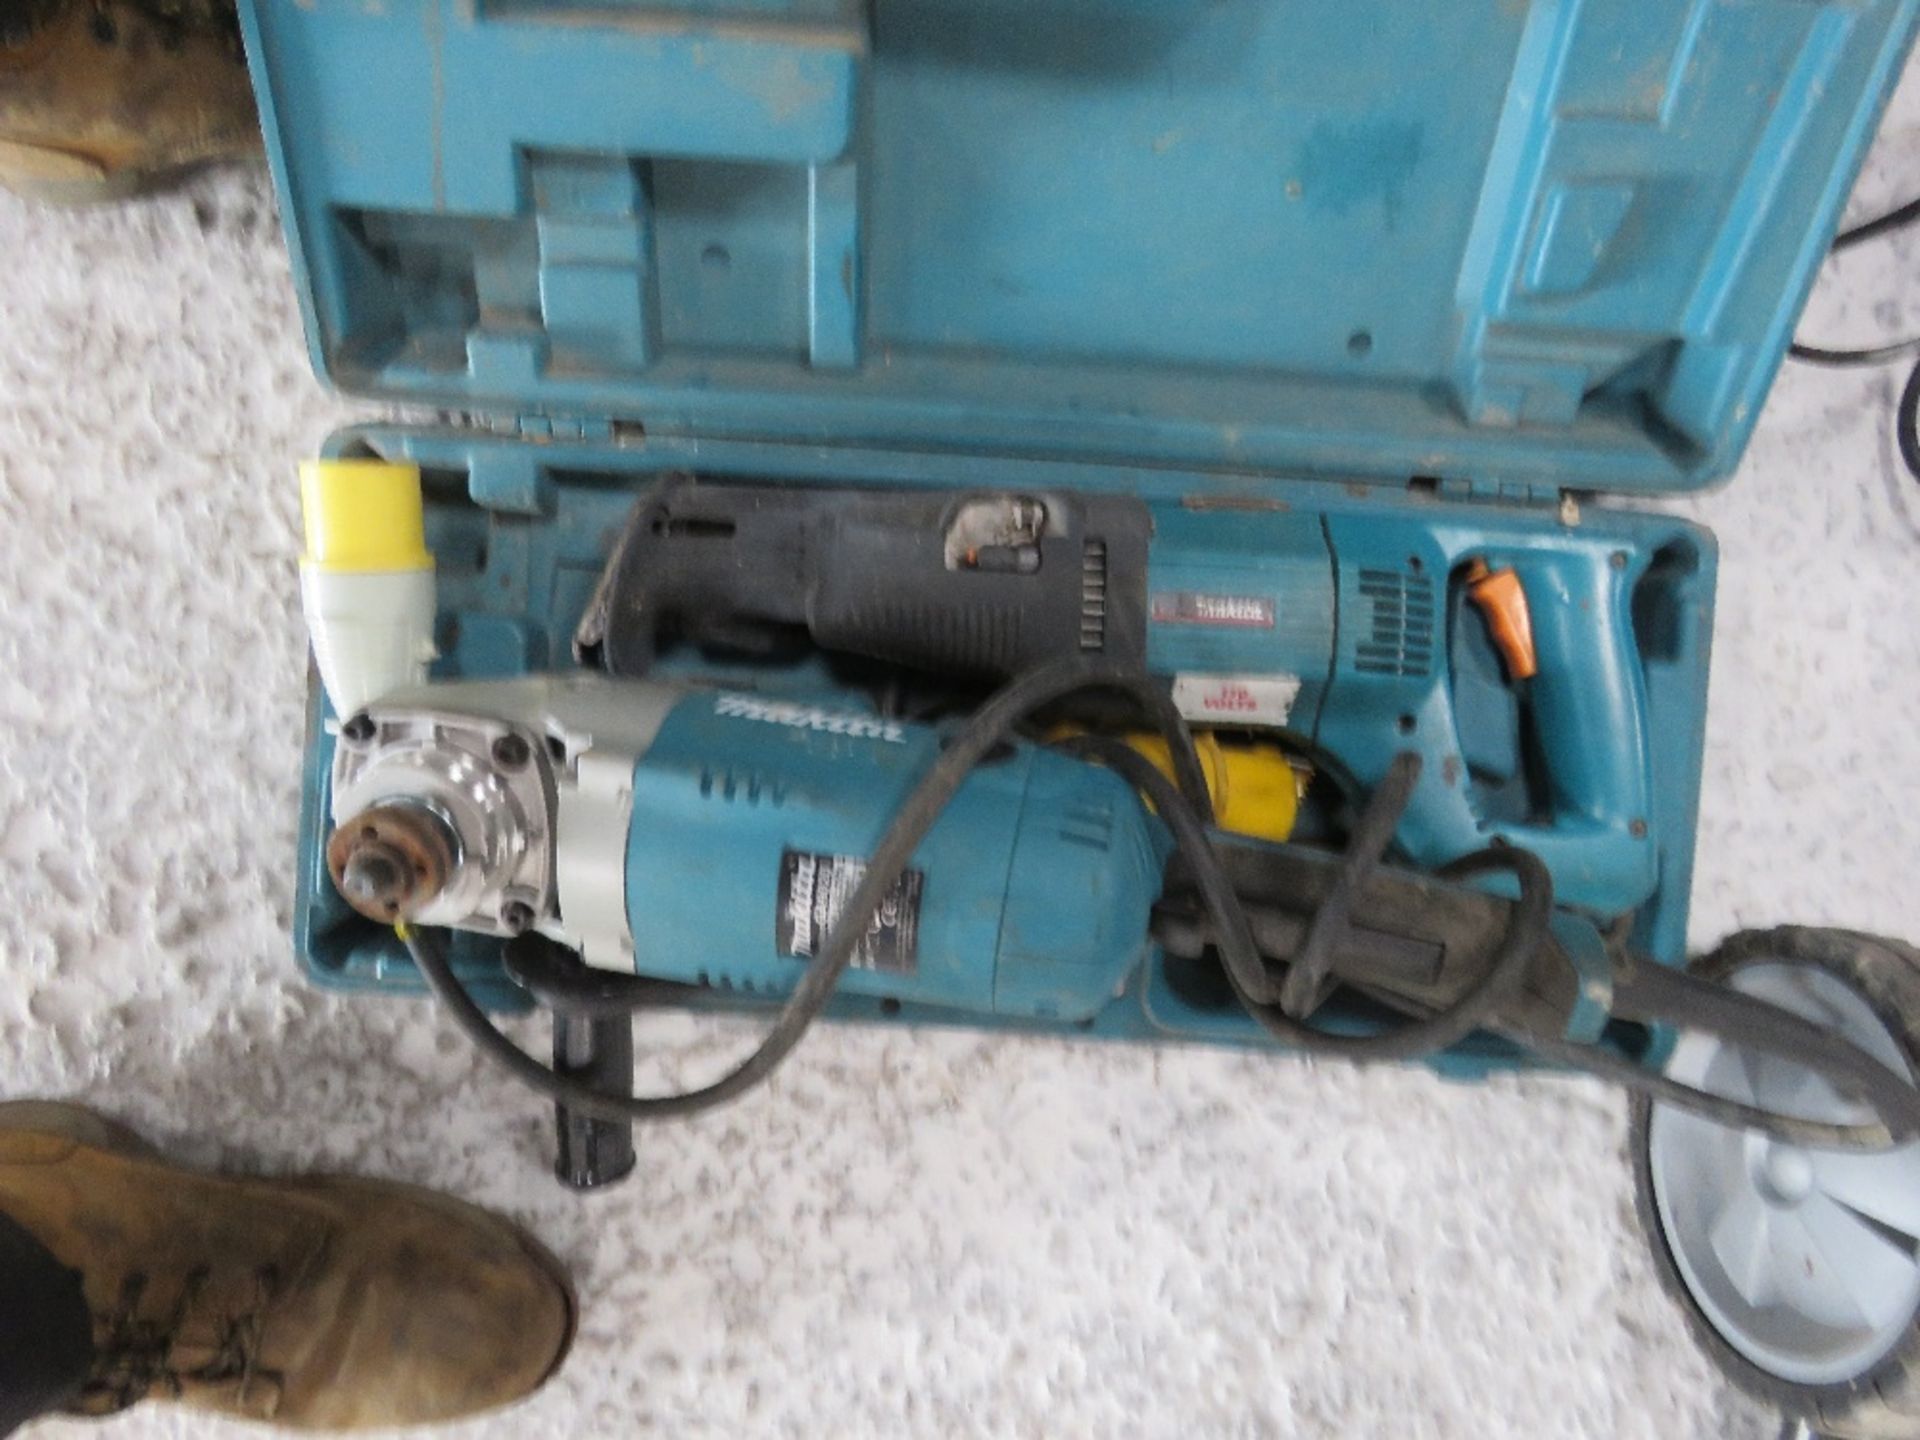 MAKITA 110VOLT GRINDER PLUS A RECIPROCATING SAW.....THIS LOT IS SOLD UNDER THE AUCTIONEERS MARGIN SC